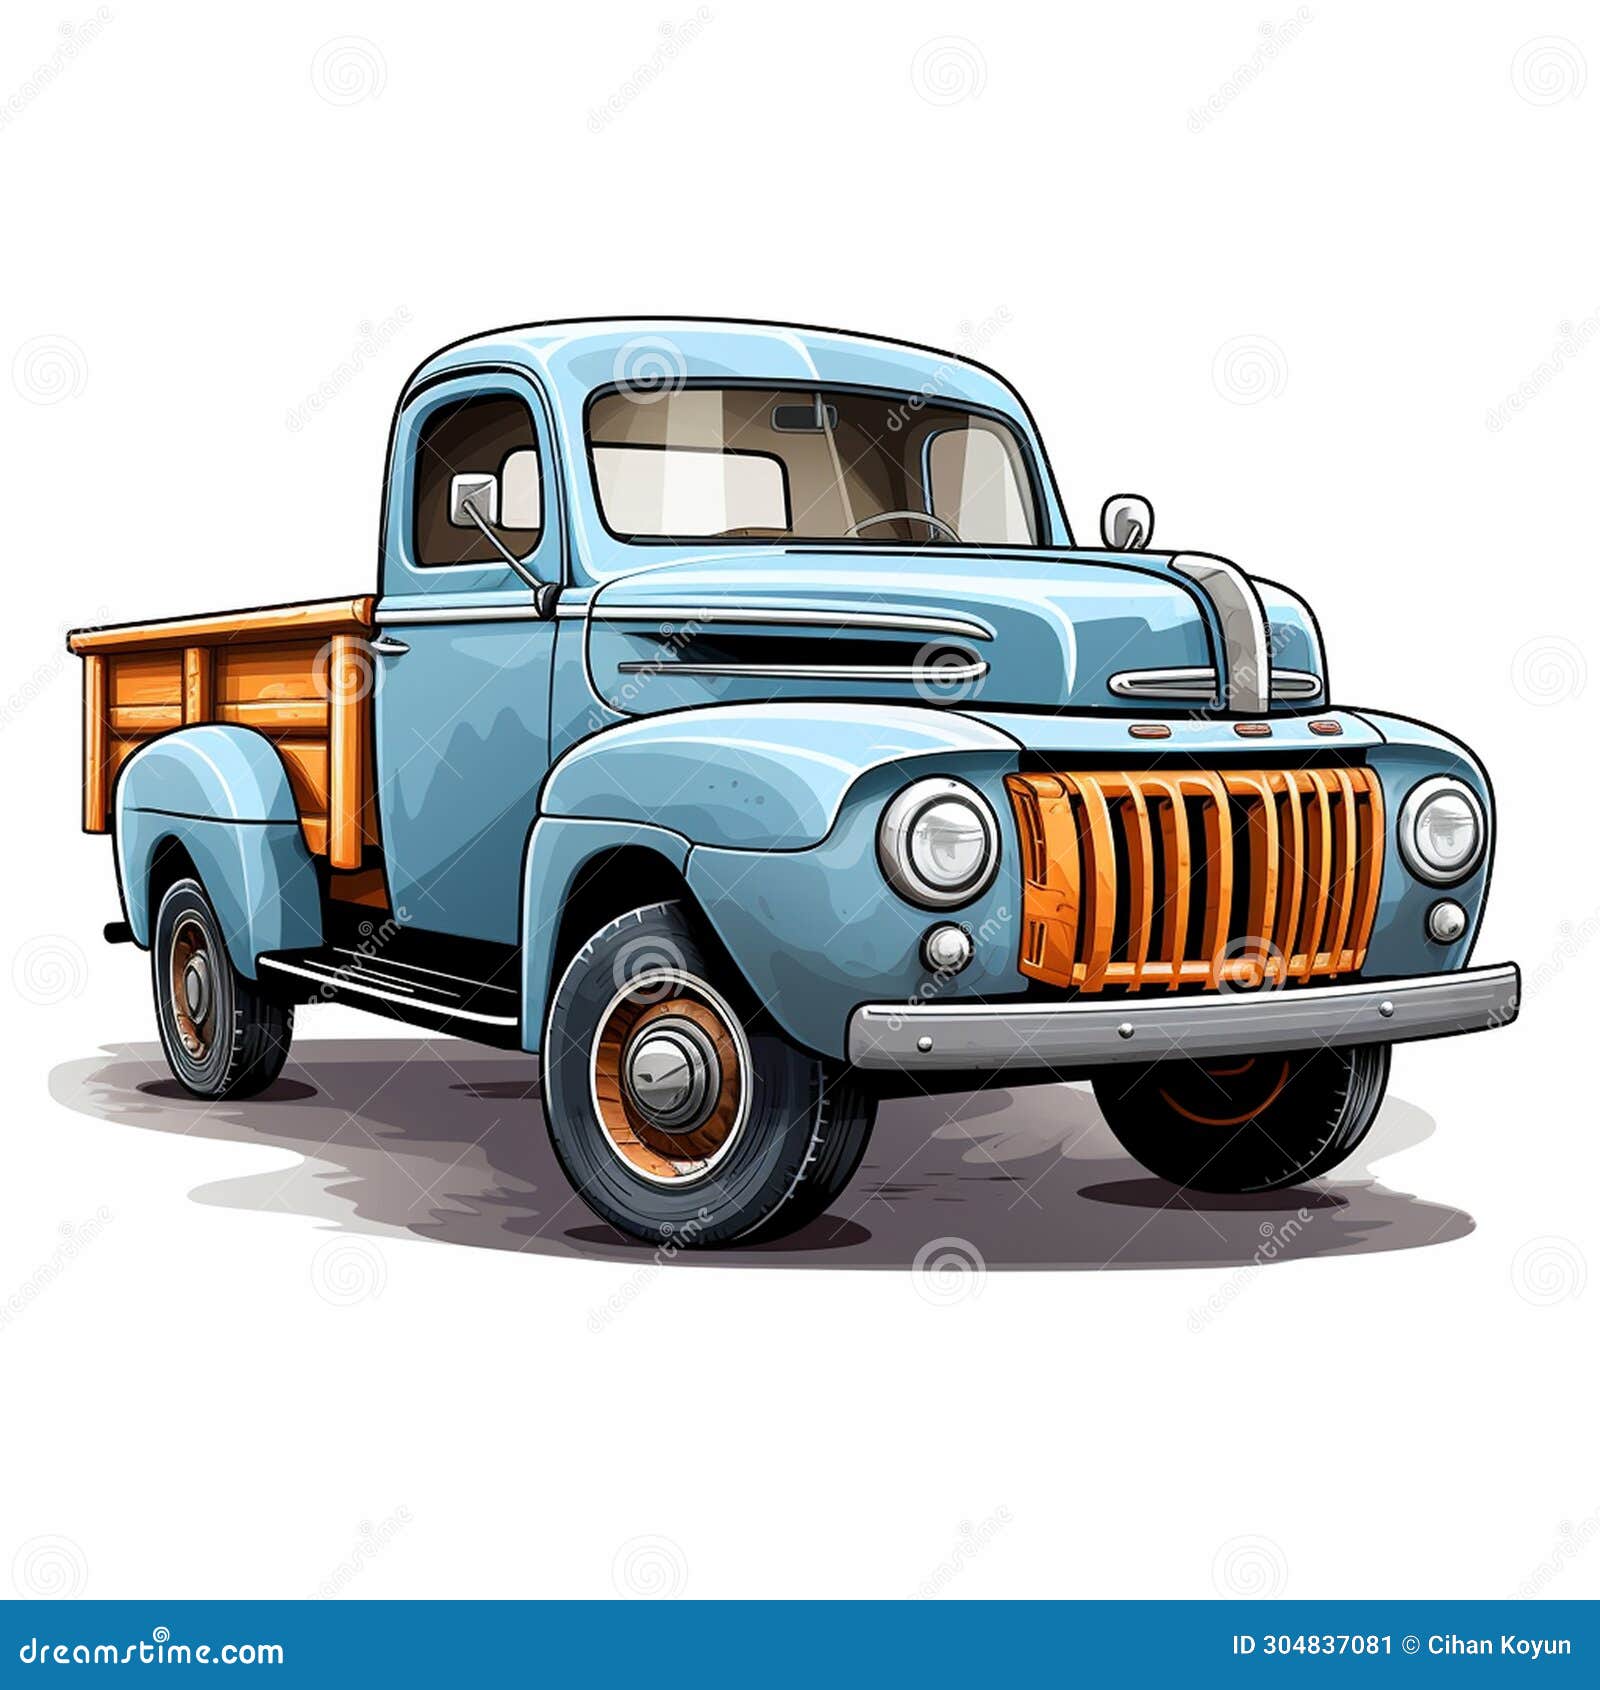 Dump truck driving along road simple drawing Vector Image